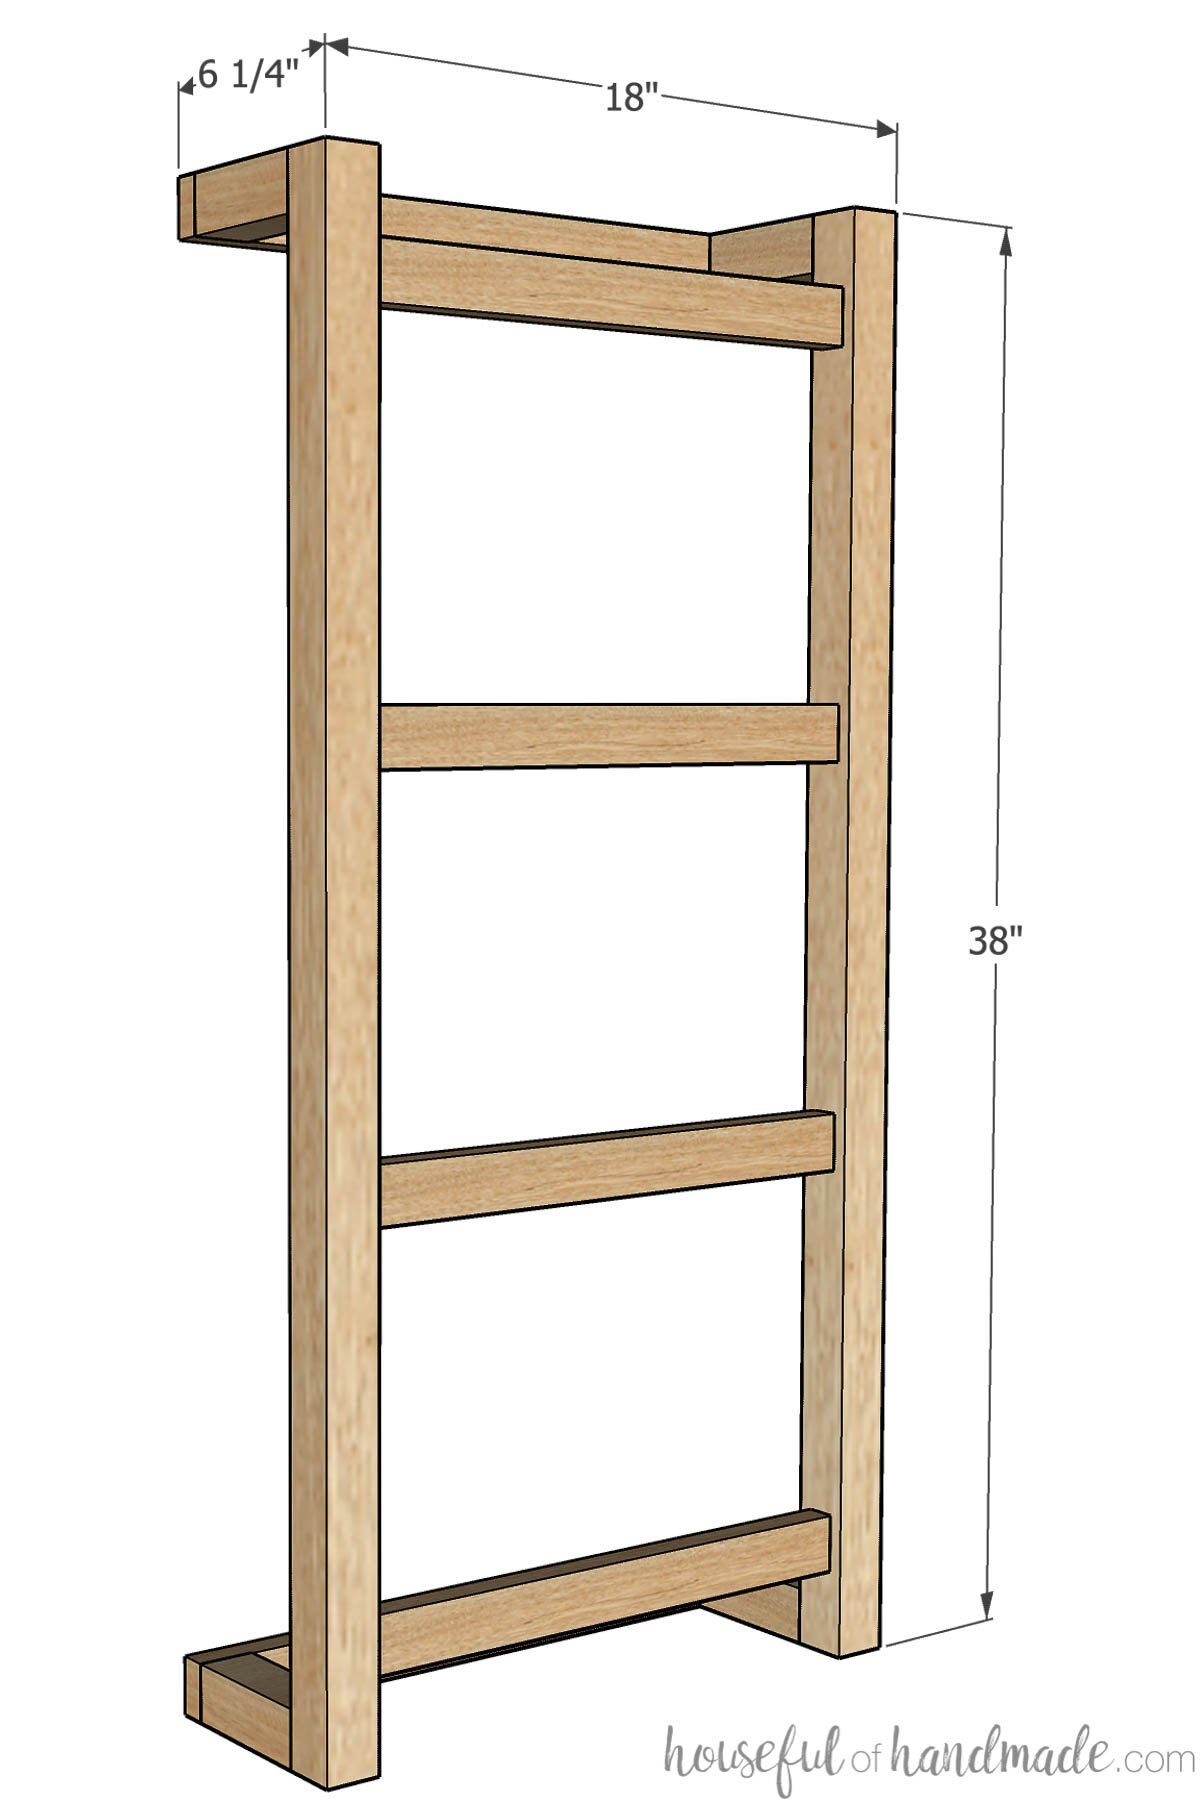 3D SketchUp drawing of the wall mounted blanket ladder with dimensions listed on it. 